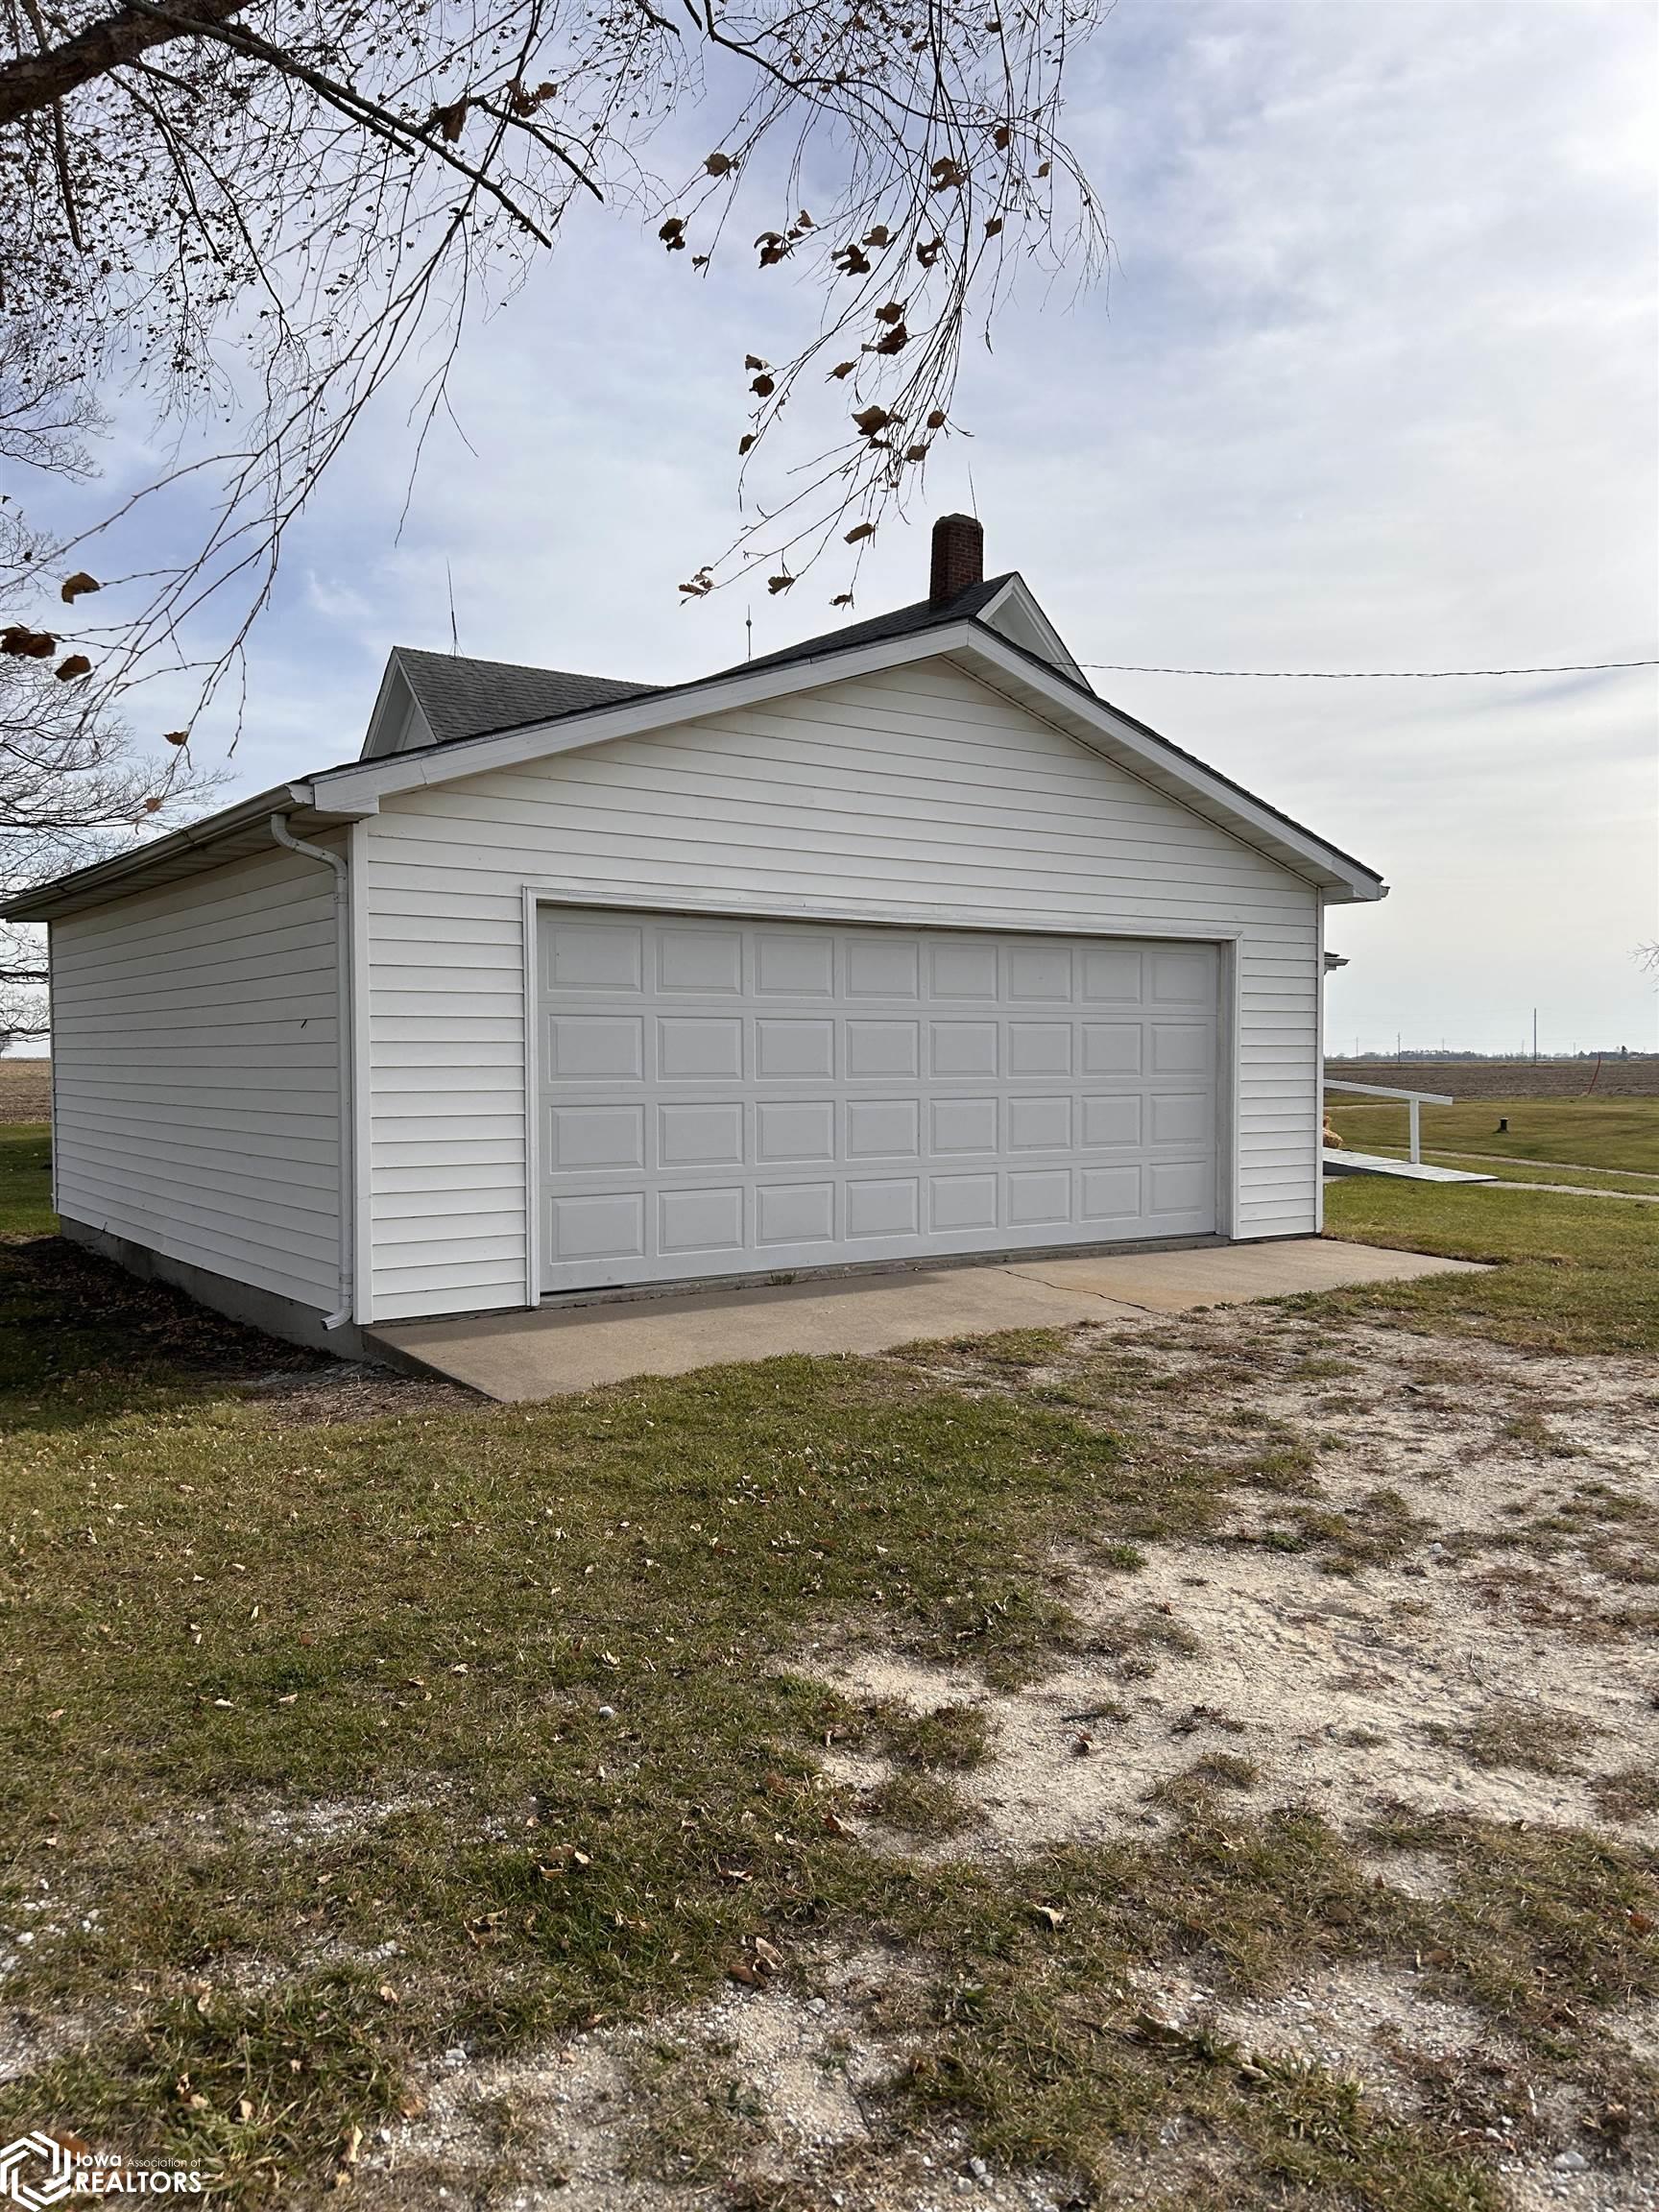 1441 County Road 2650, Niota, Illinois 62358, 3 Bedrooms Bedrooms, ,1 BathroomBathrooms,Single Family,For Sale,County Road 2650,6316084